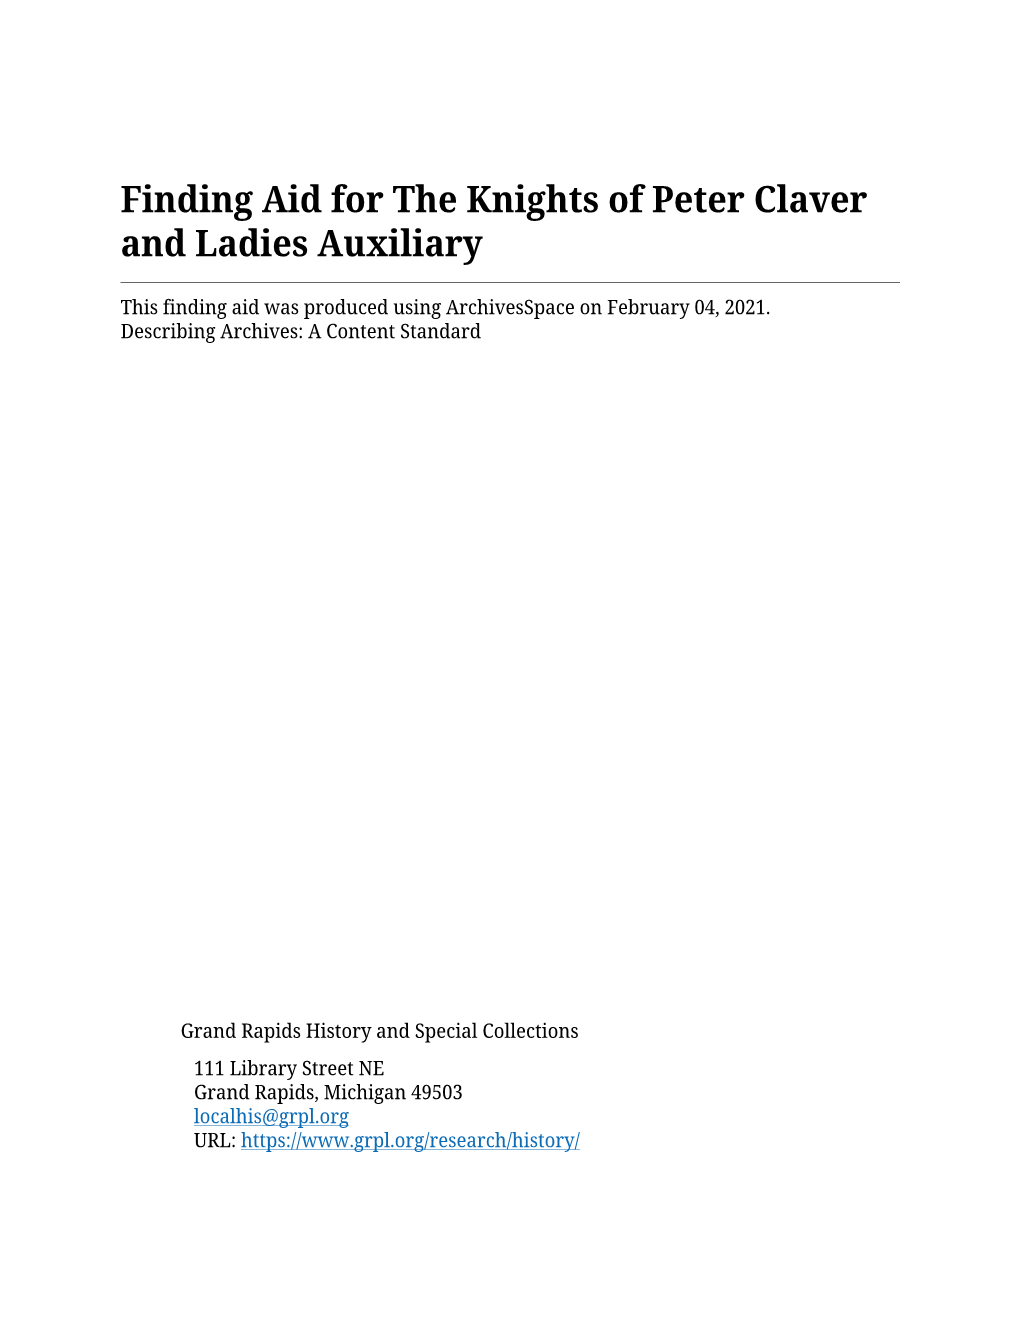 Finding Aid for the Knights of Peter Claver and Ladies Auxiliary